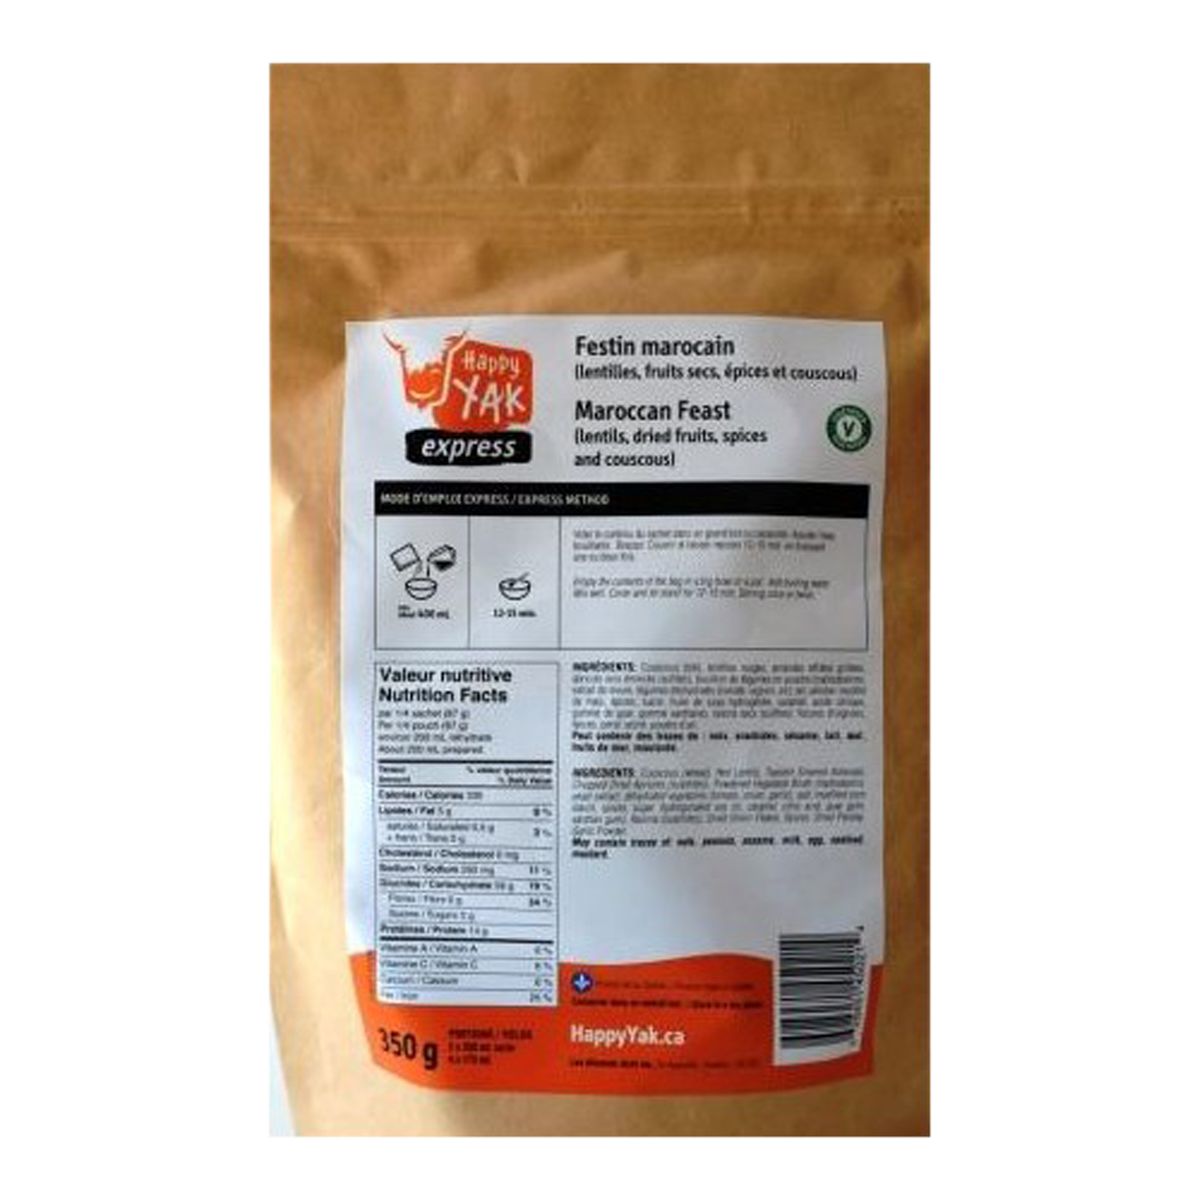 Image of Happy Yak Moroccan Couscous and Lentils Dehydrated Food Package